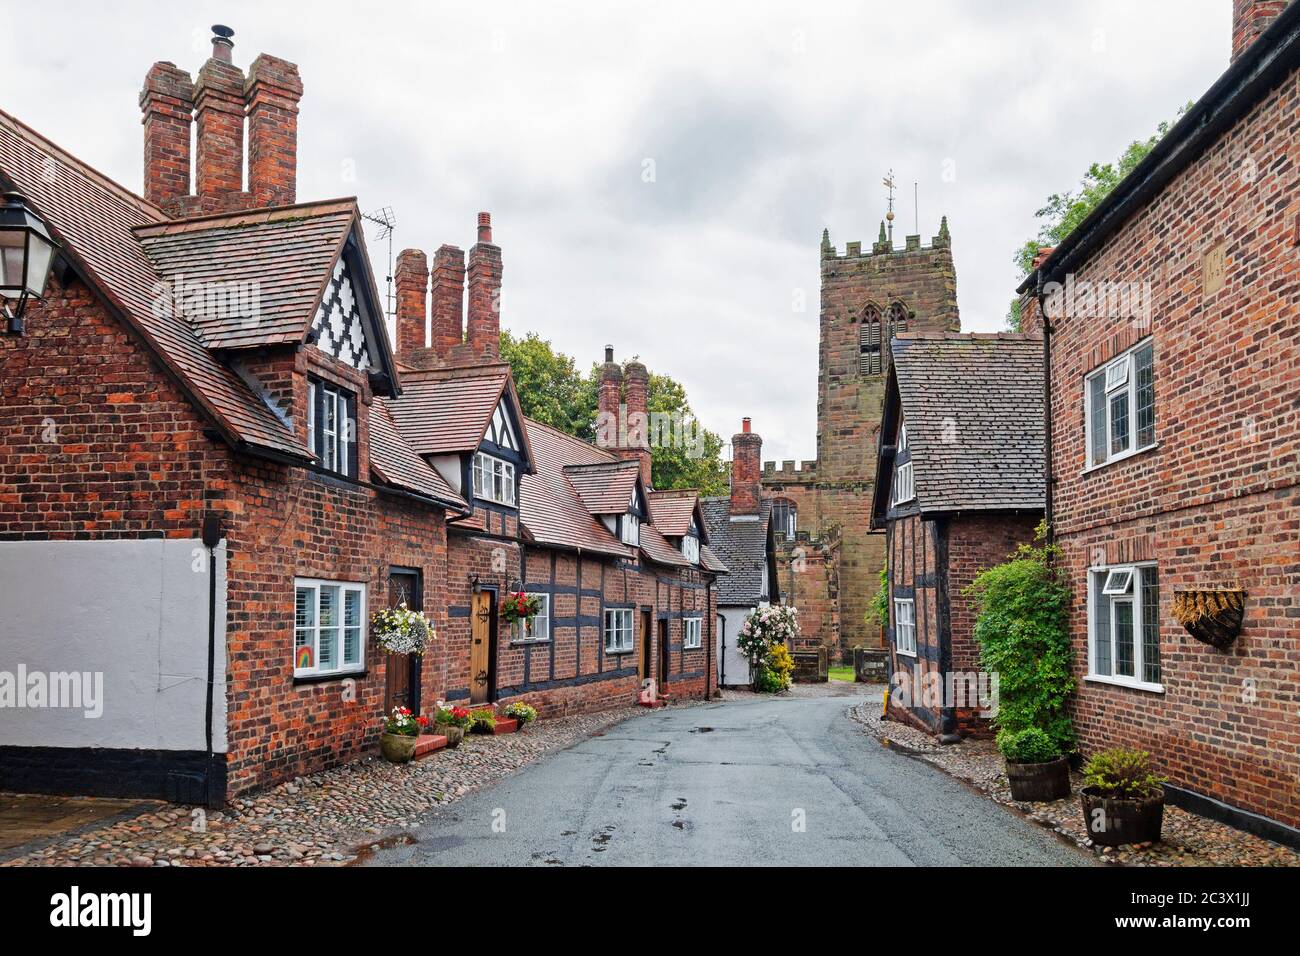 16th century grade 11 listed homes in the main street of the village of great budworth in cheshire, england Stock Photo